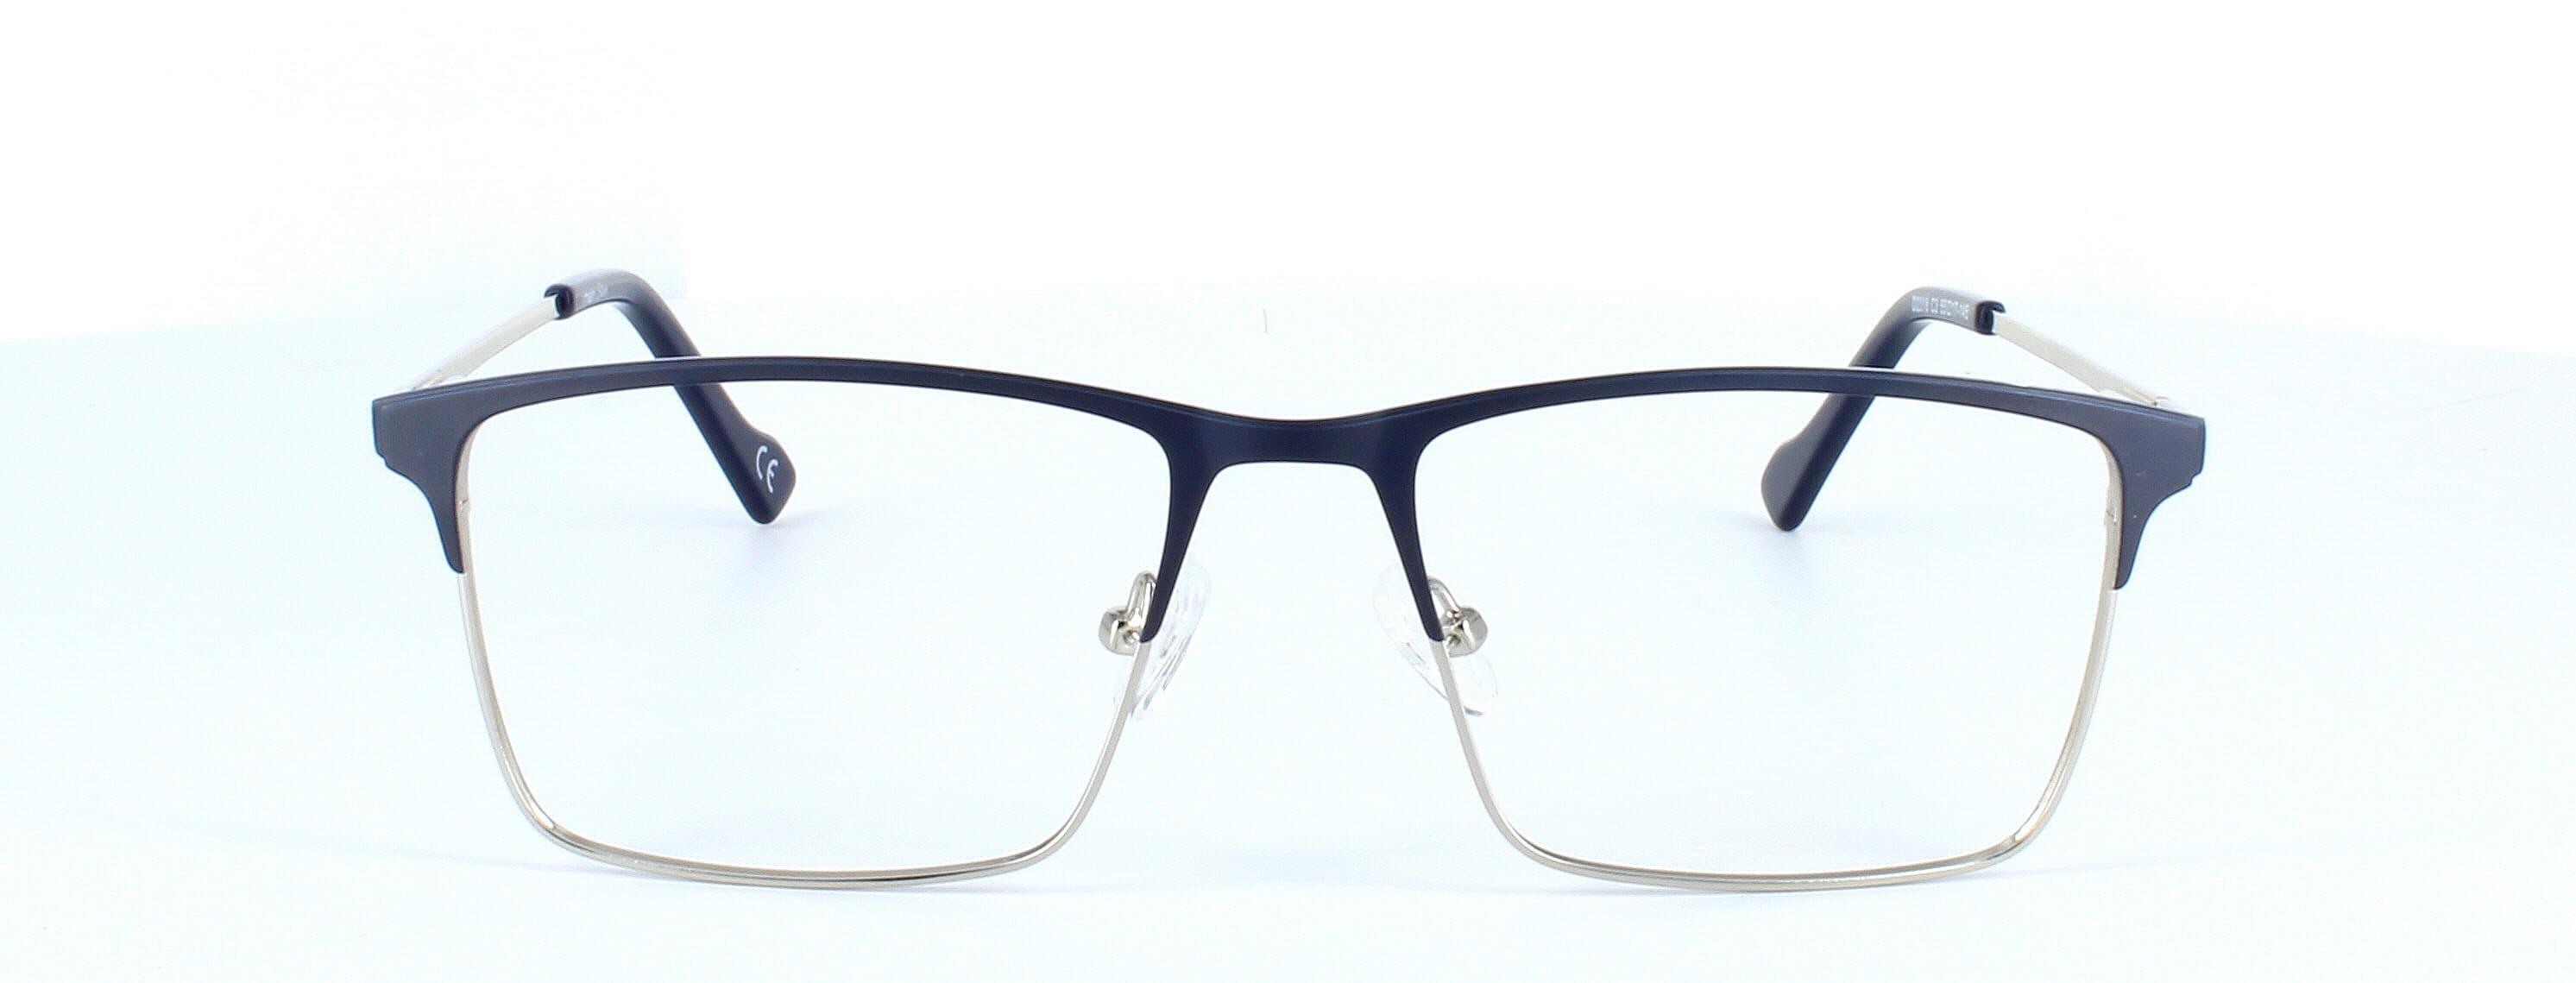 Warminster - blue & silver gent's glasses frame with rectangular shaped lenses - image view 5